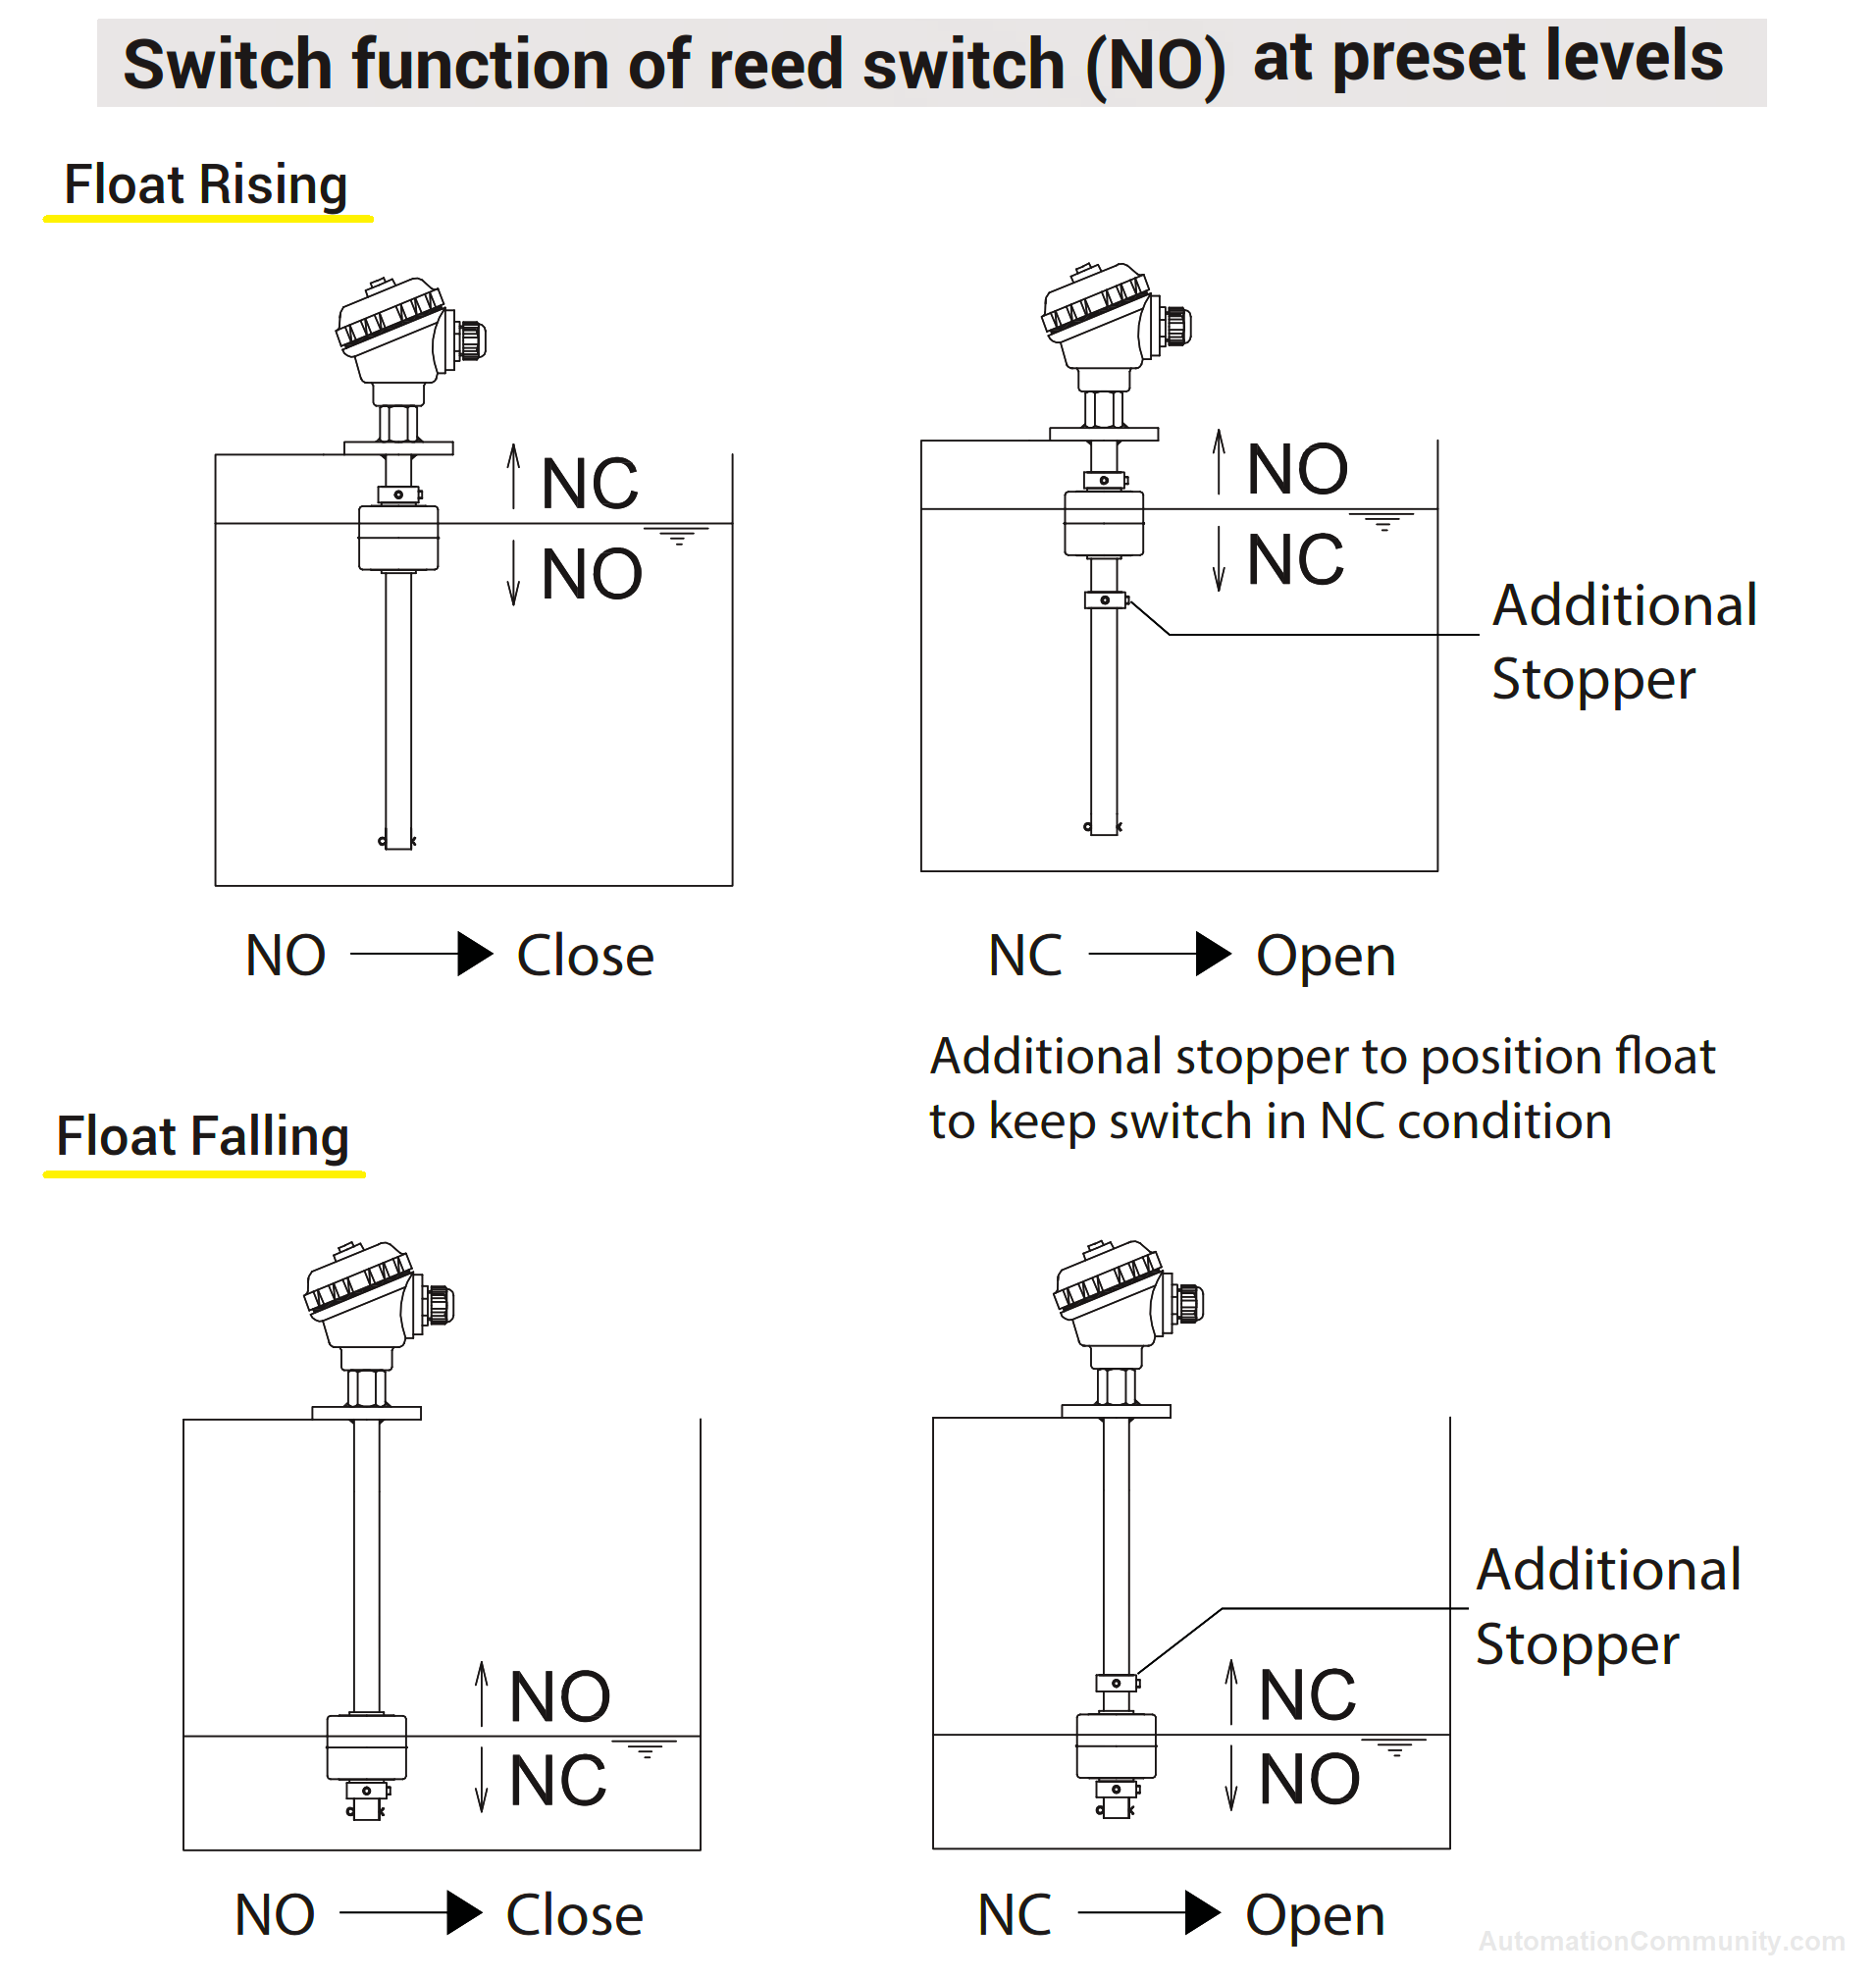 Switch function of reed switch in Level Switch